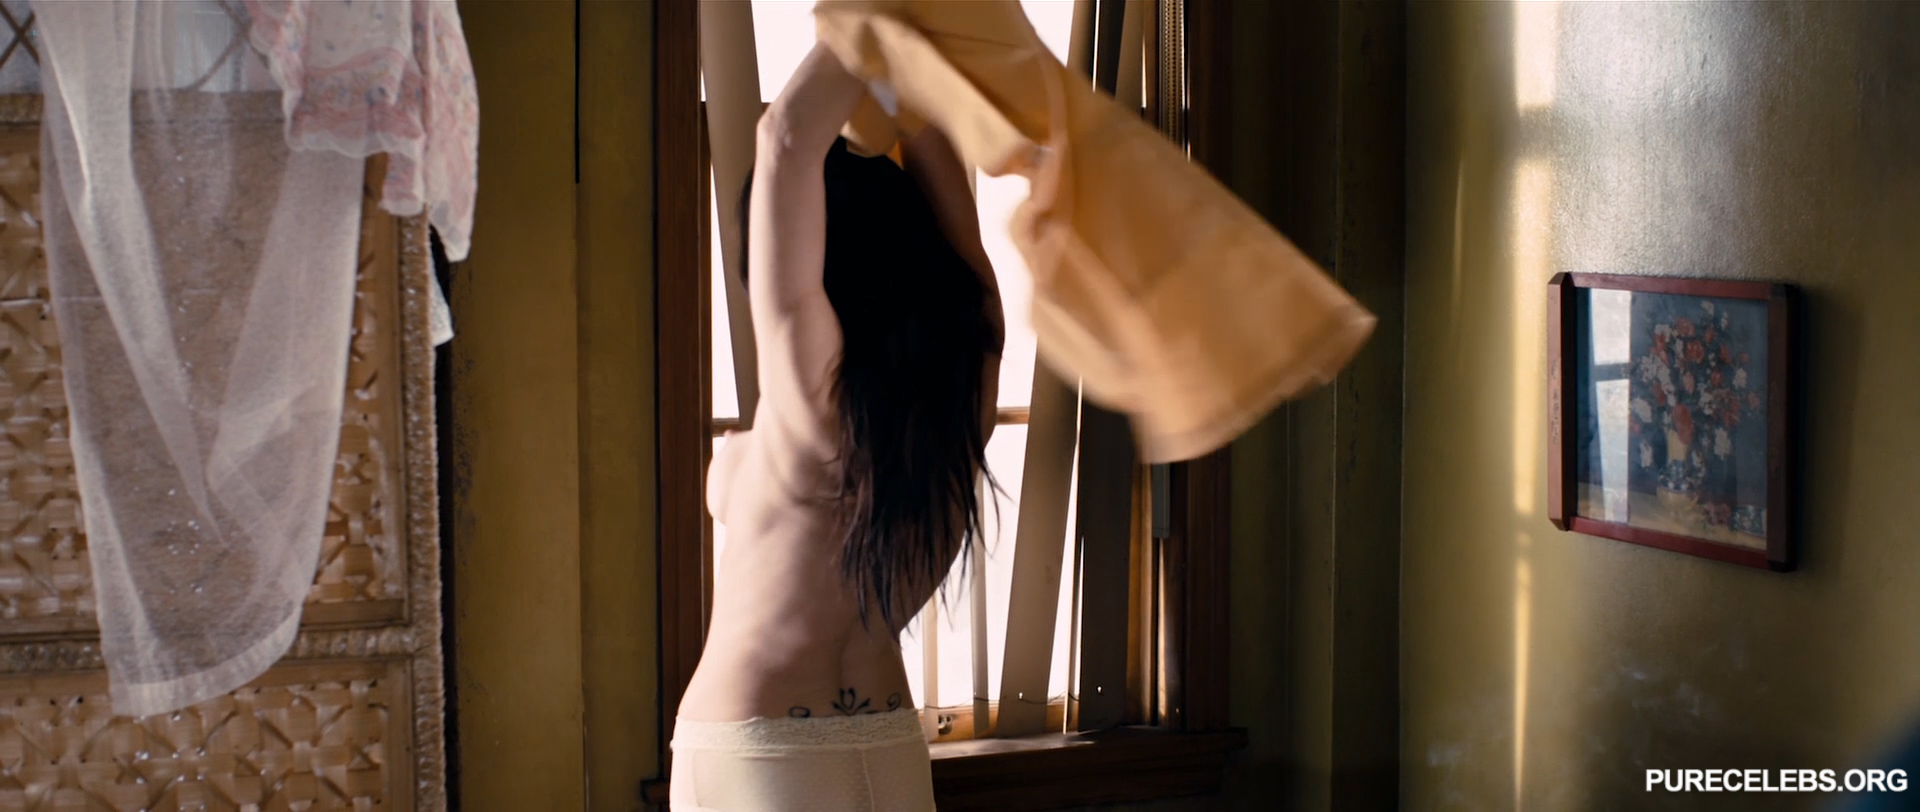 Lynn collins ever been nude